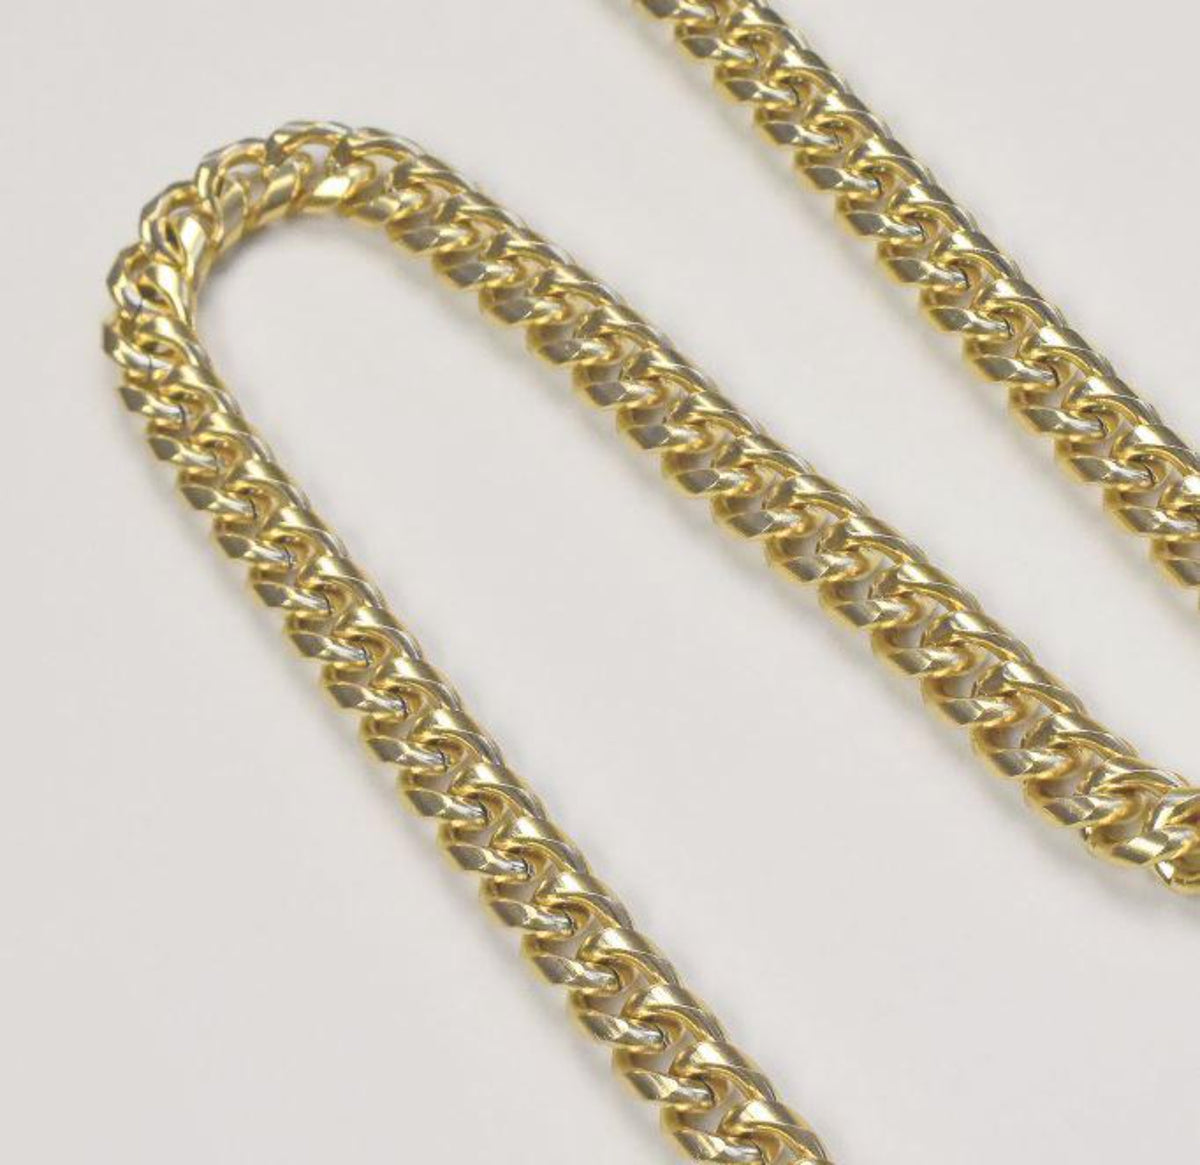 GOLD CHAIN NECKLACE WATERPROOF